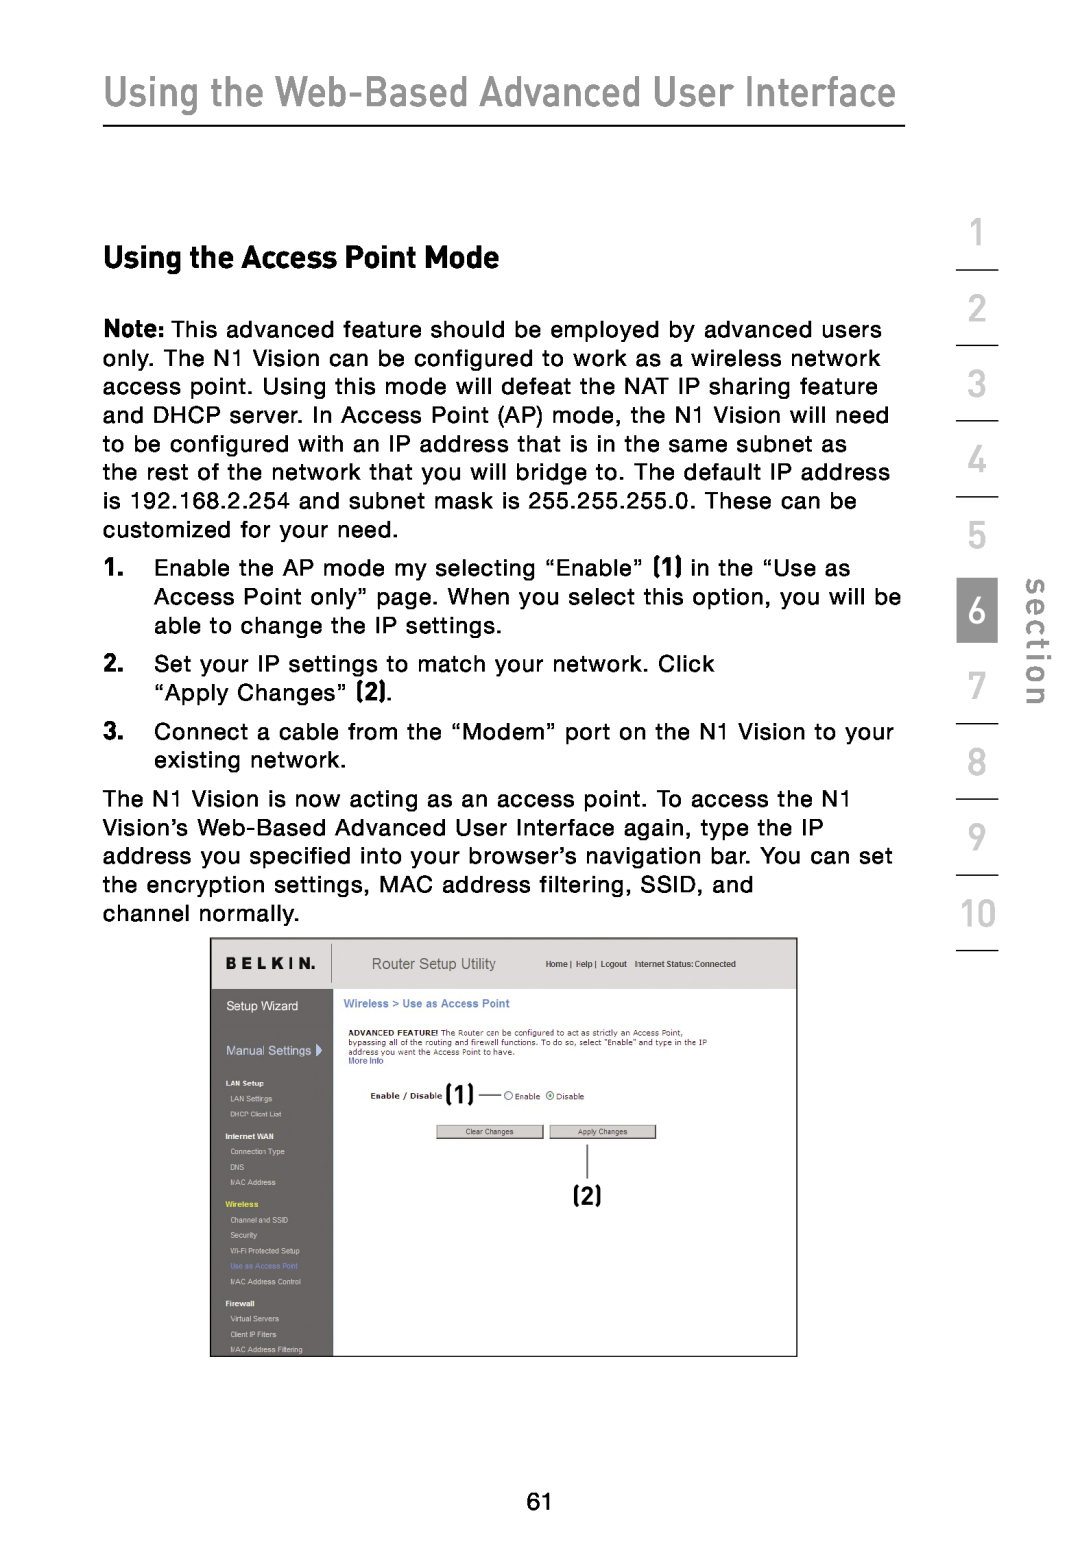 Belkin N1 user manual Using the Access Point Mode, Using the Web-Based Advanced User Interface, section 